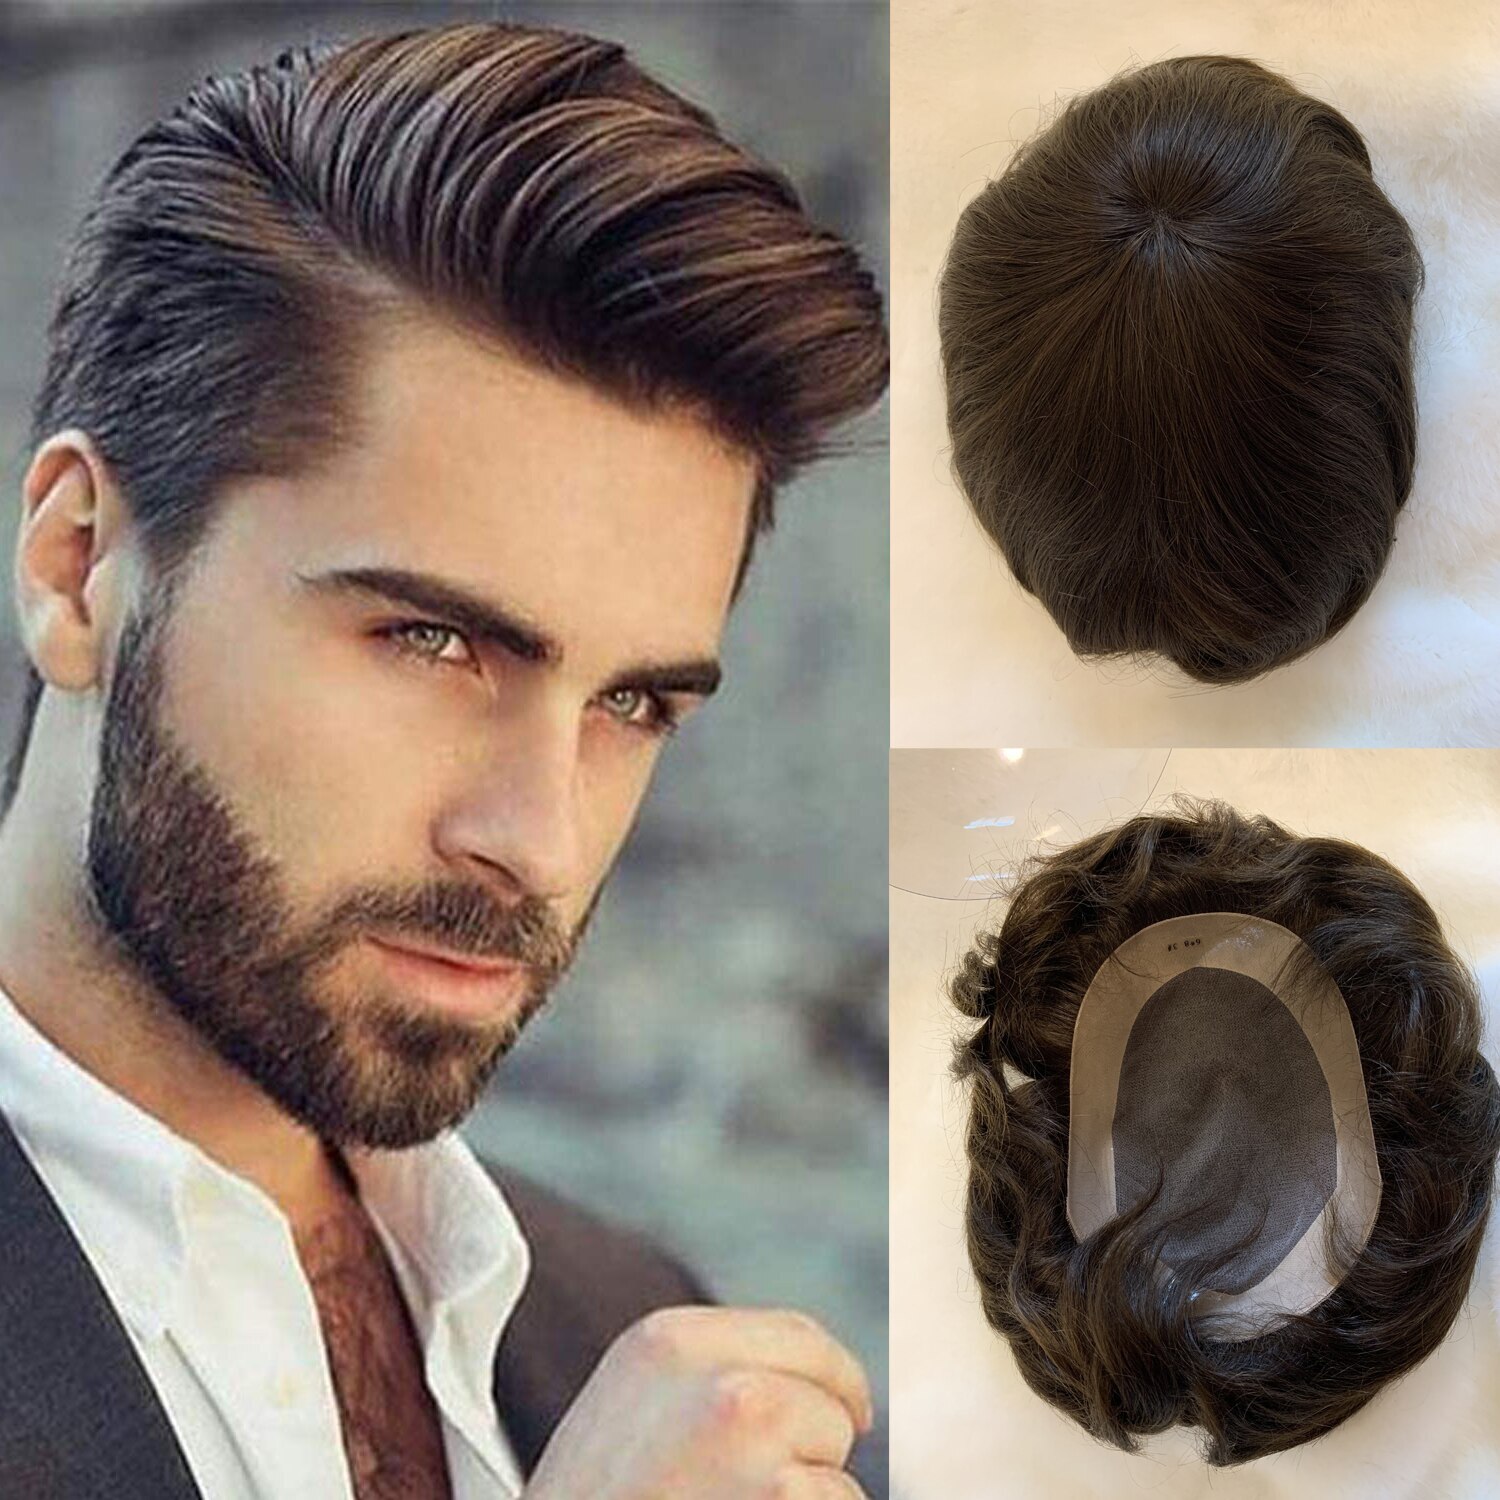 Hair toppers for thinning hair on top of head and European Human Hair Pieces for Men with 10" x 8" Super Thin French Lace,#1B Off Black Hair toppers for thinning hair on top of head and Human Hair Toupee for Men